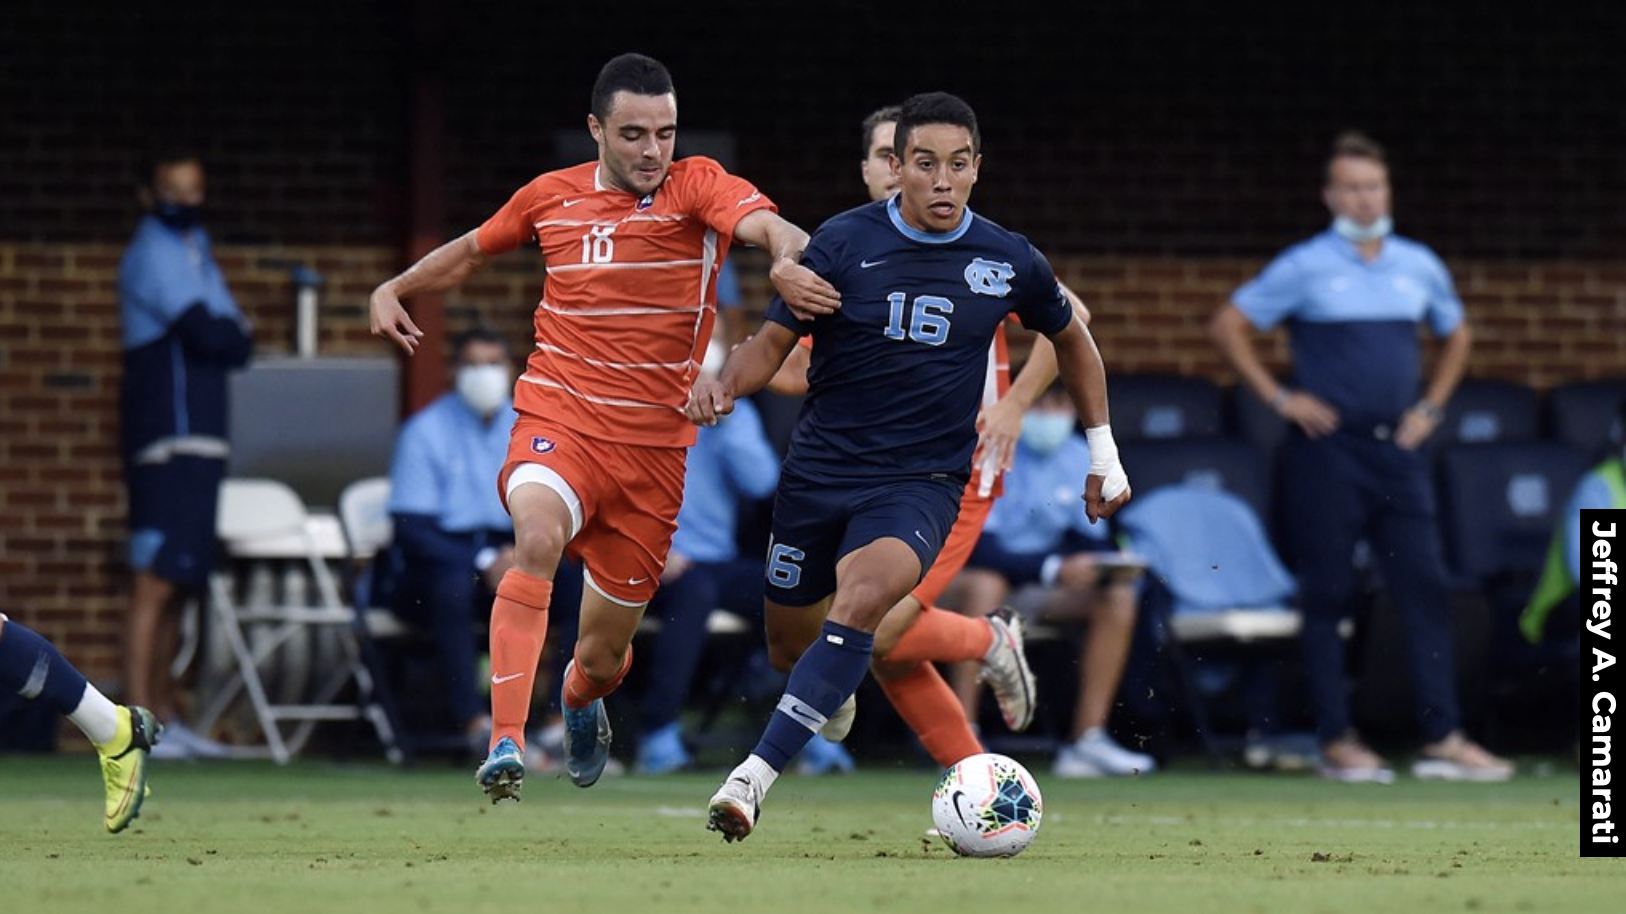 Bracket unveiled for ACC Men’s Soccer Championship SoccerWire